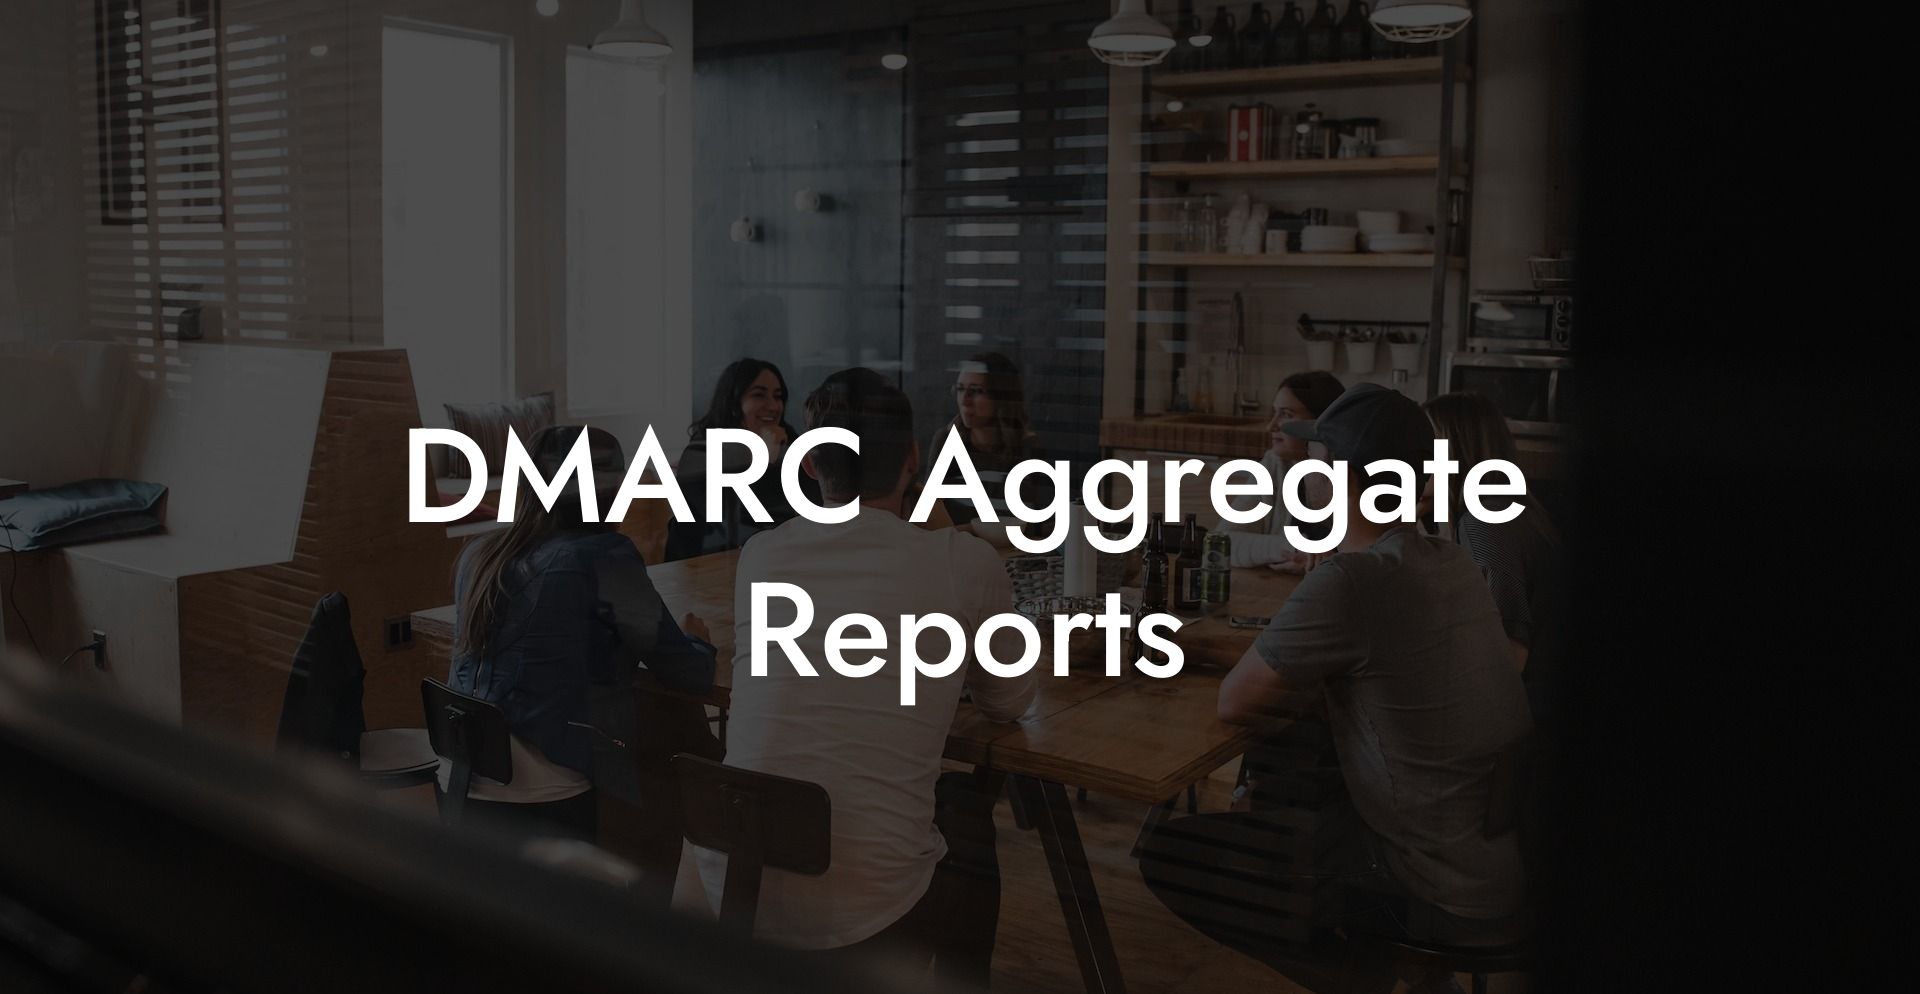 DMARC Aggregate Reports